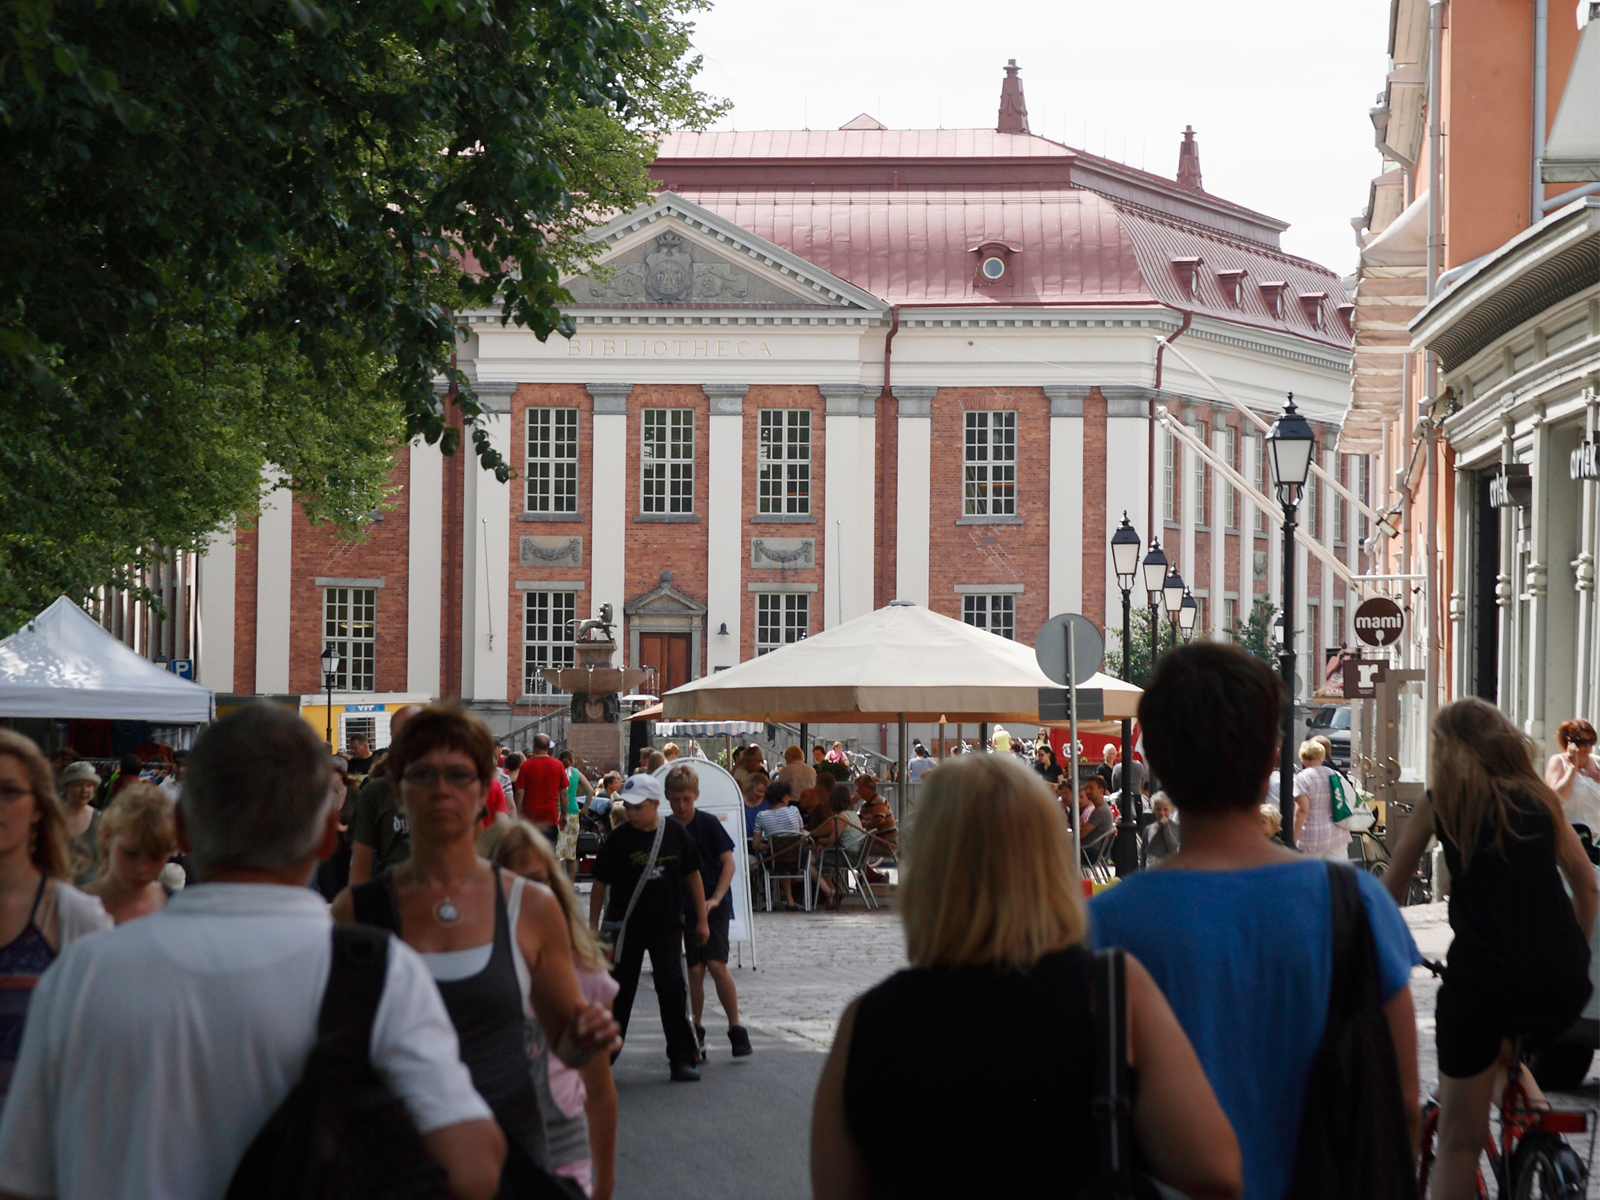 The old library square in City of Turku